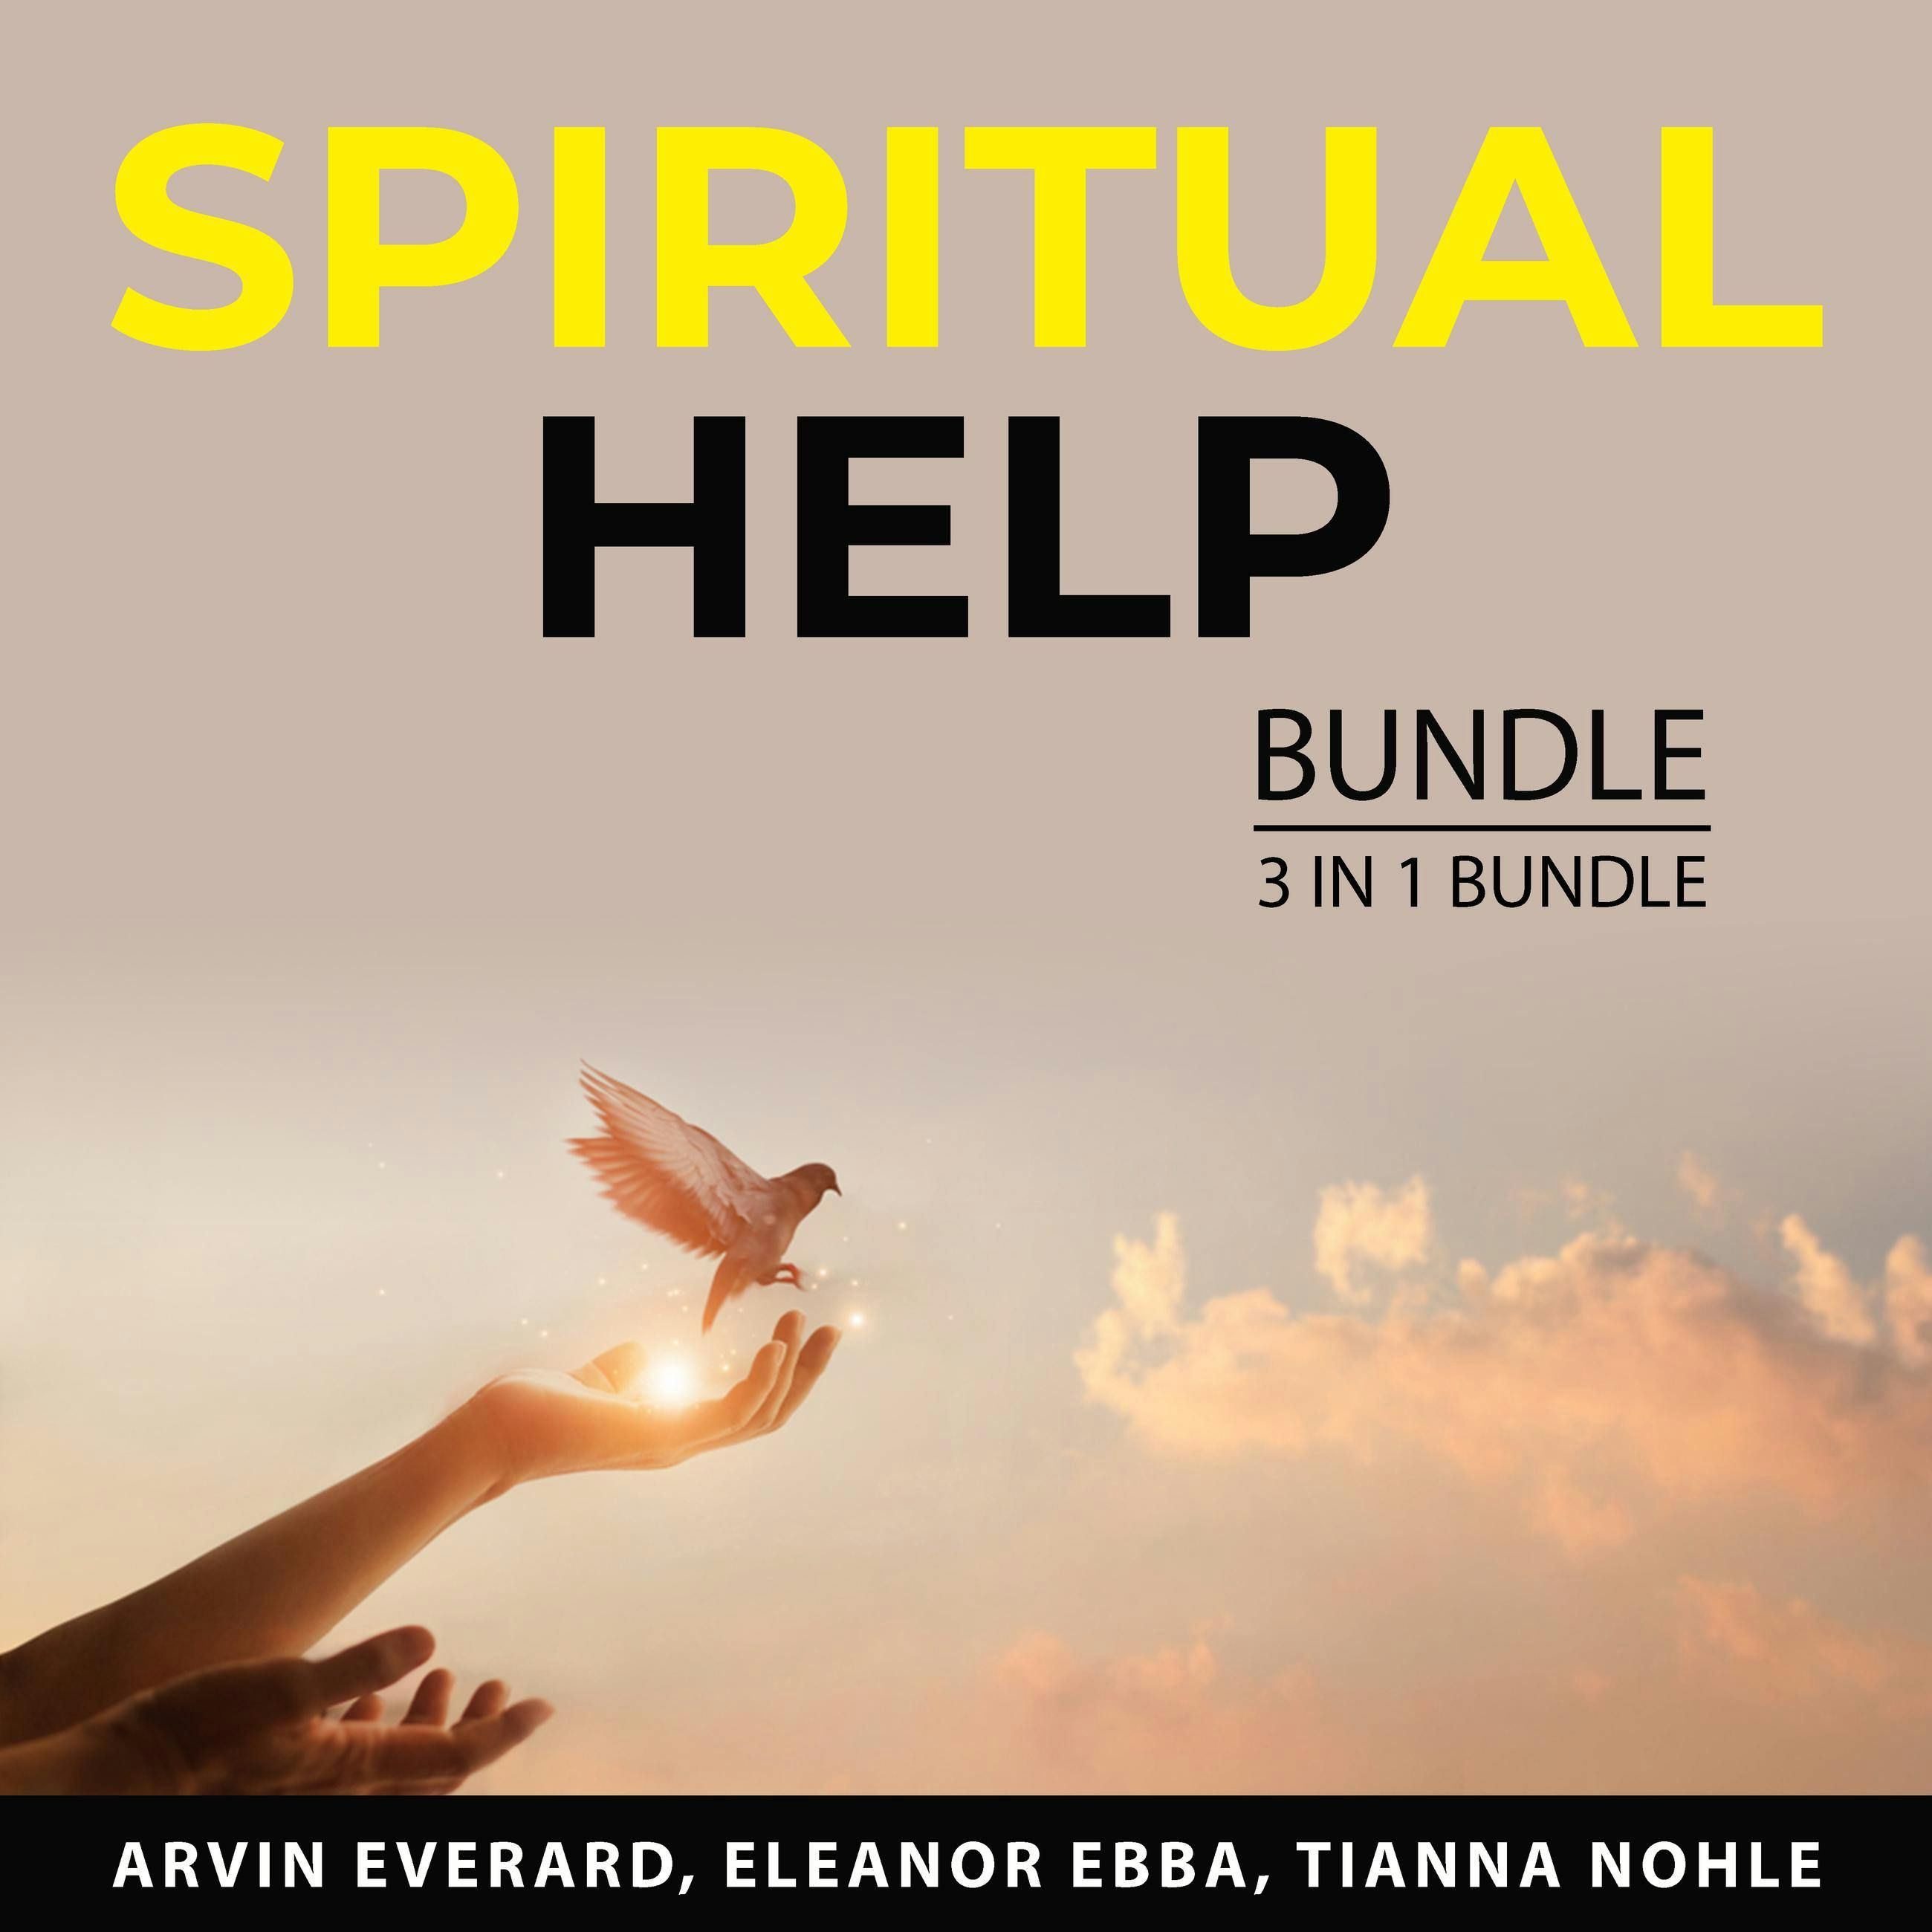 Spiritual Help Bundle, 3 in 1 Bundle: The Power of Affirmative Prayers, Living by Faith, Spiritual Resolution - Arvin Everard, Eleanor Ebba, Tianna Nohle